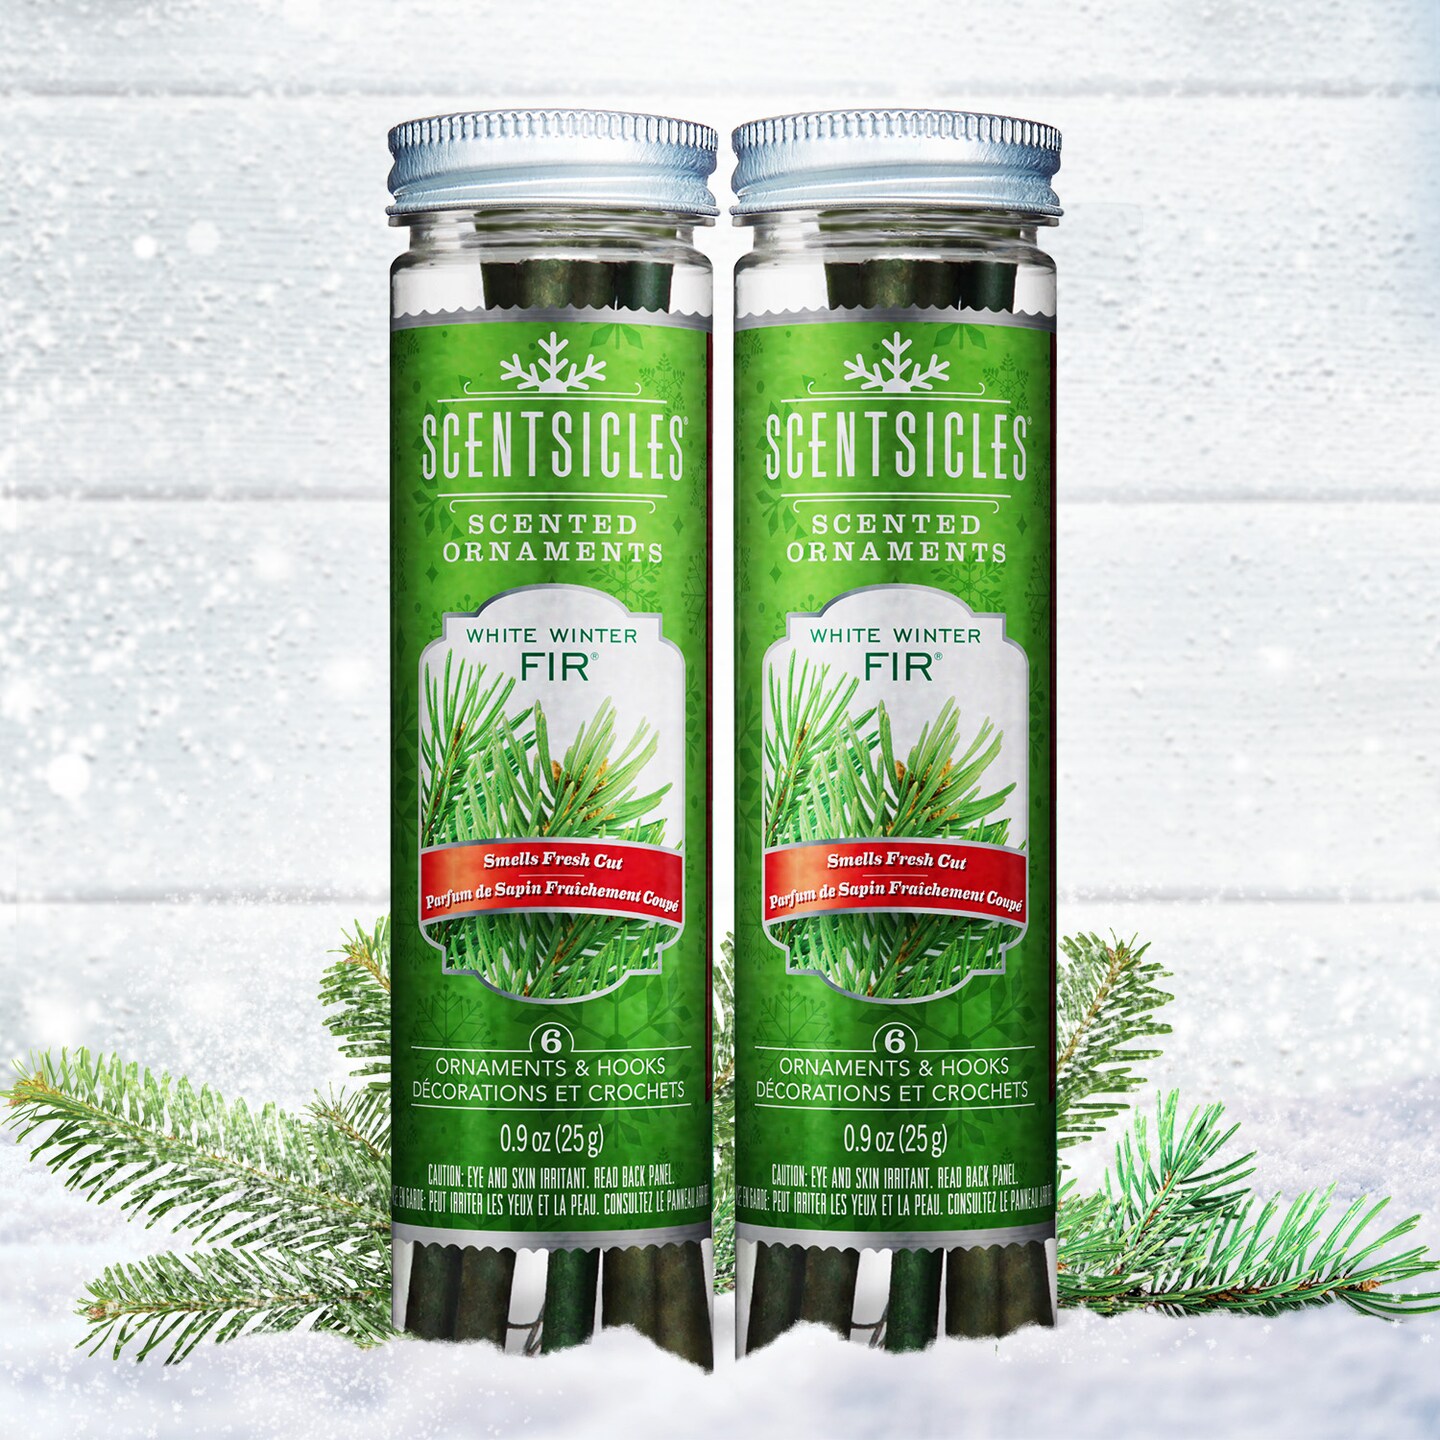 Scentsicles, Scented Ornaments, 6ct Bottle, White Winter Fir, Fragrance-Infused Paper Sticks, 2 Pack